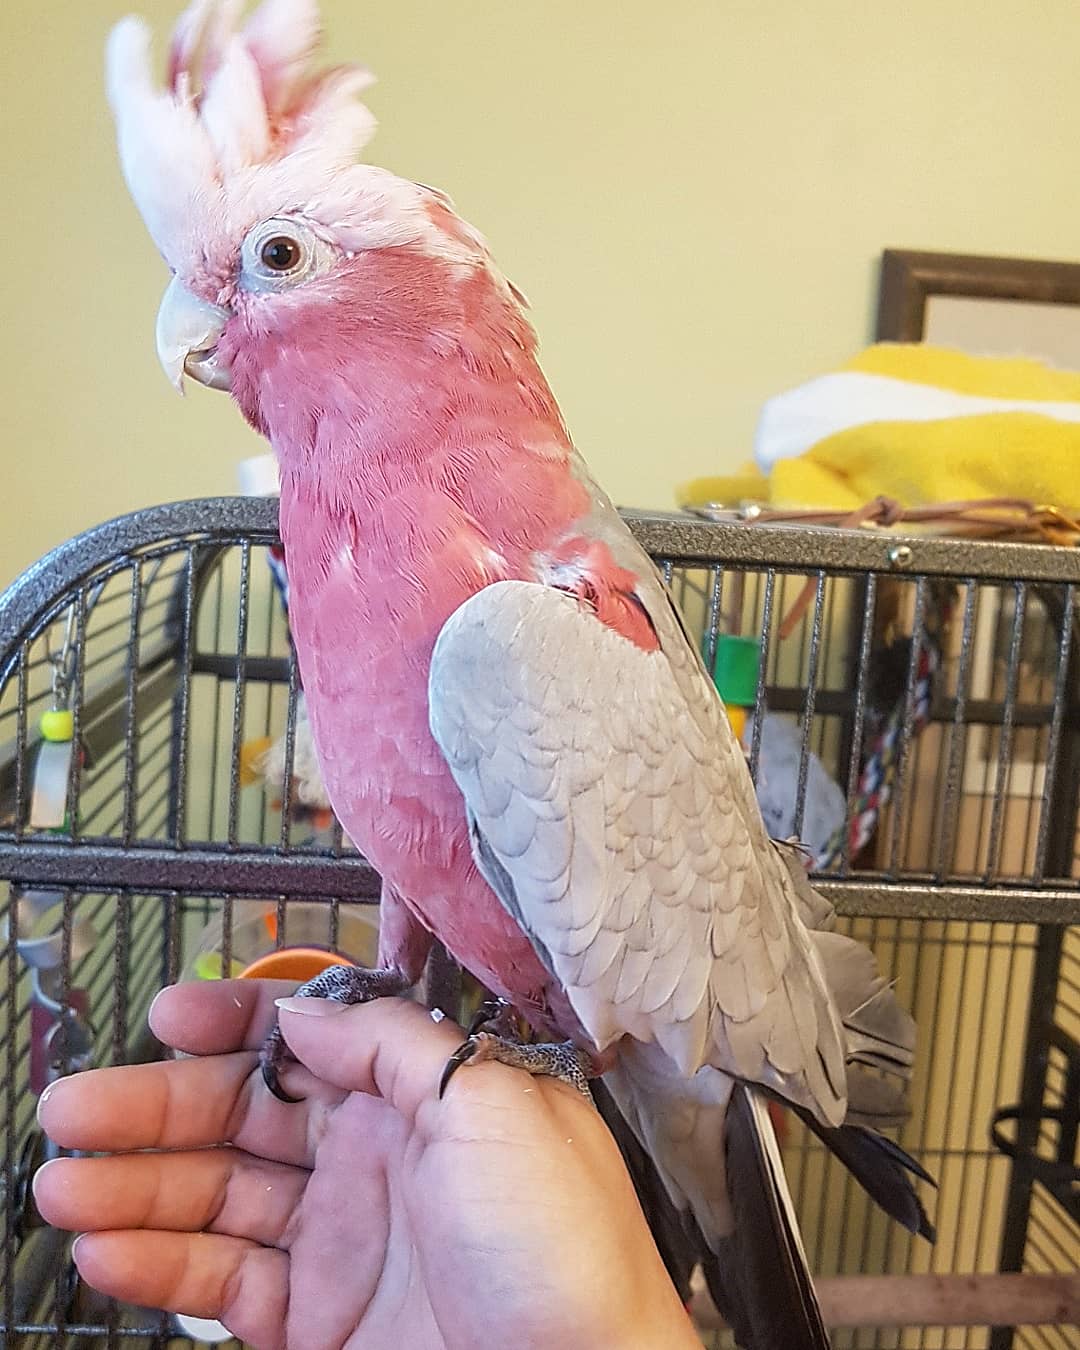 A pink bird sitting on someone 's hand in front of a cage.